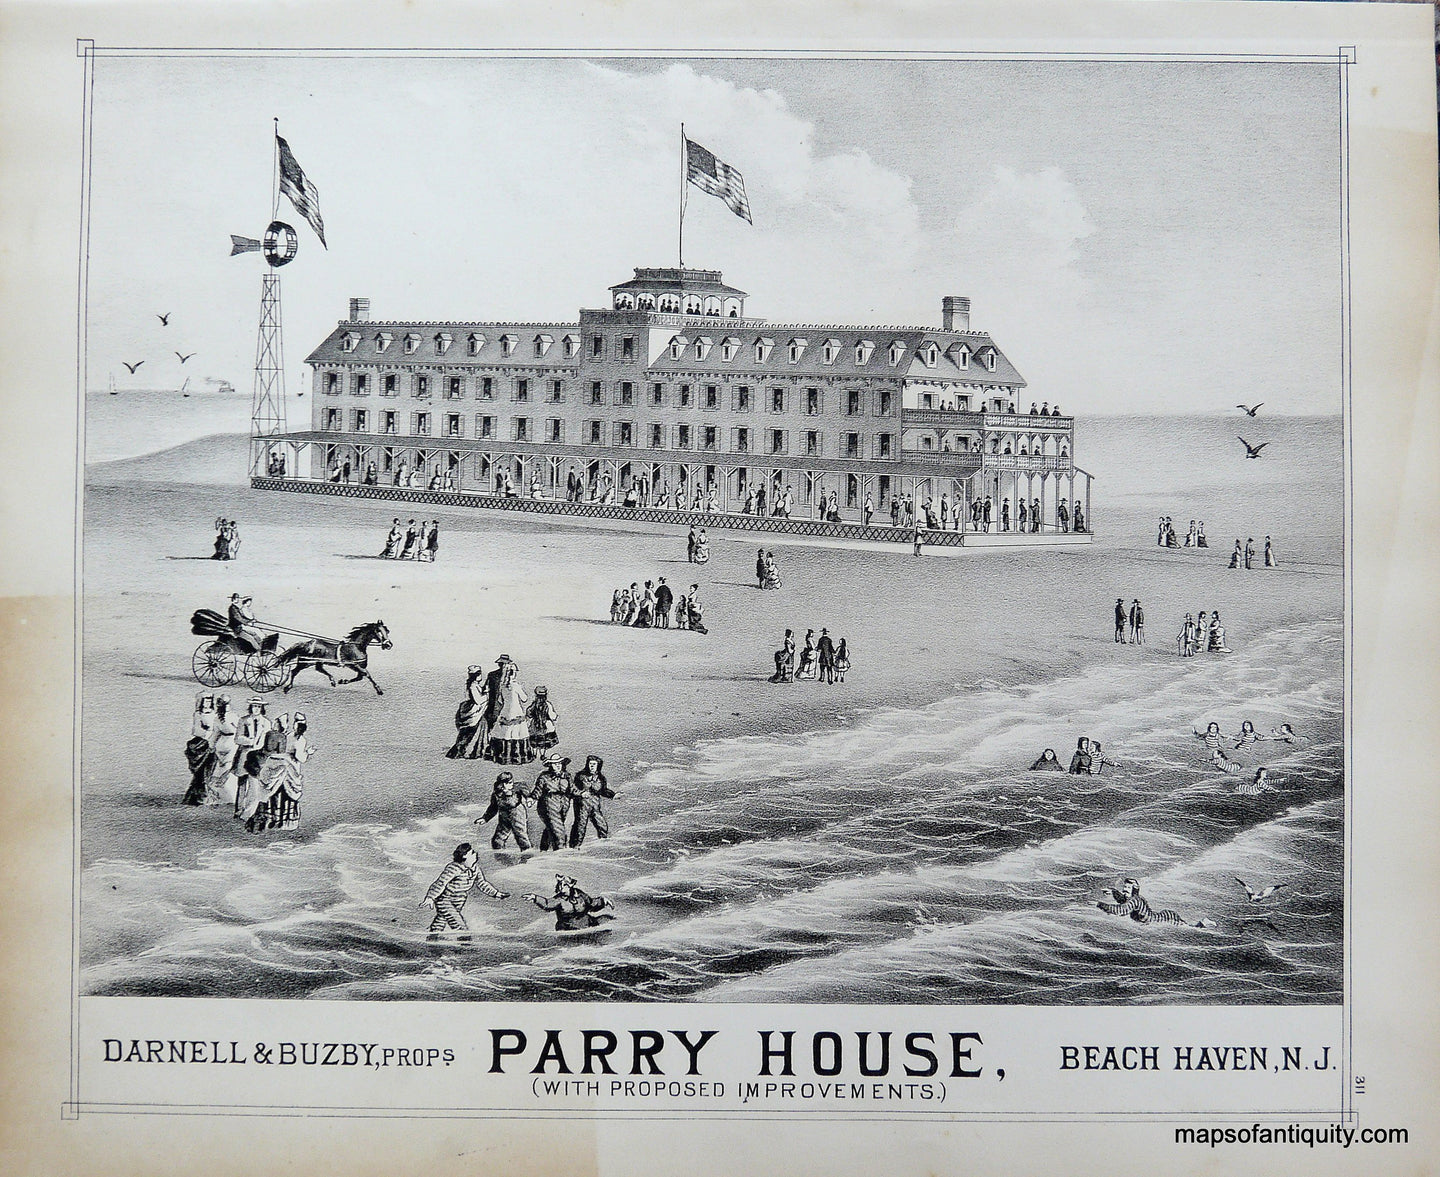 Antique-Black-and-White-Engraving-Beach-Haven-N.J.-Parry-House--United-States-New-Jersey-1878-Woolman-&-Rose-Maps-Of-Antiquity